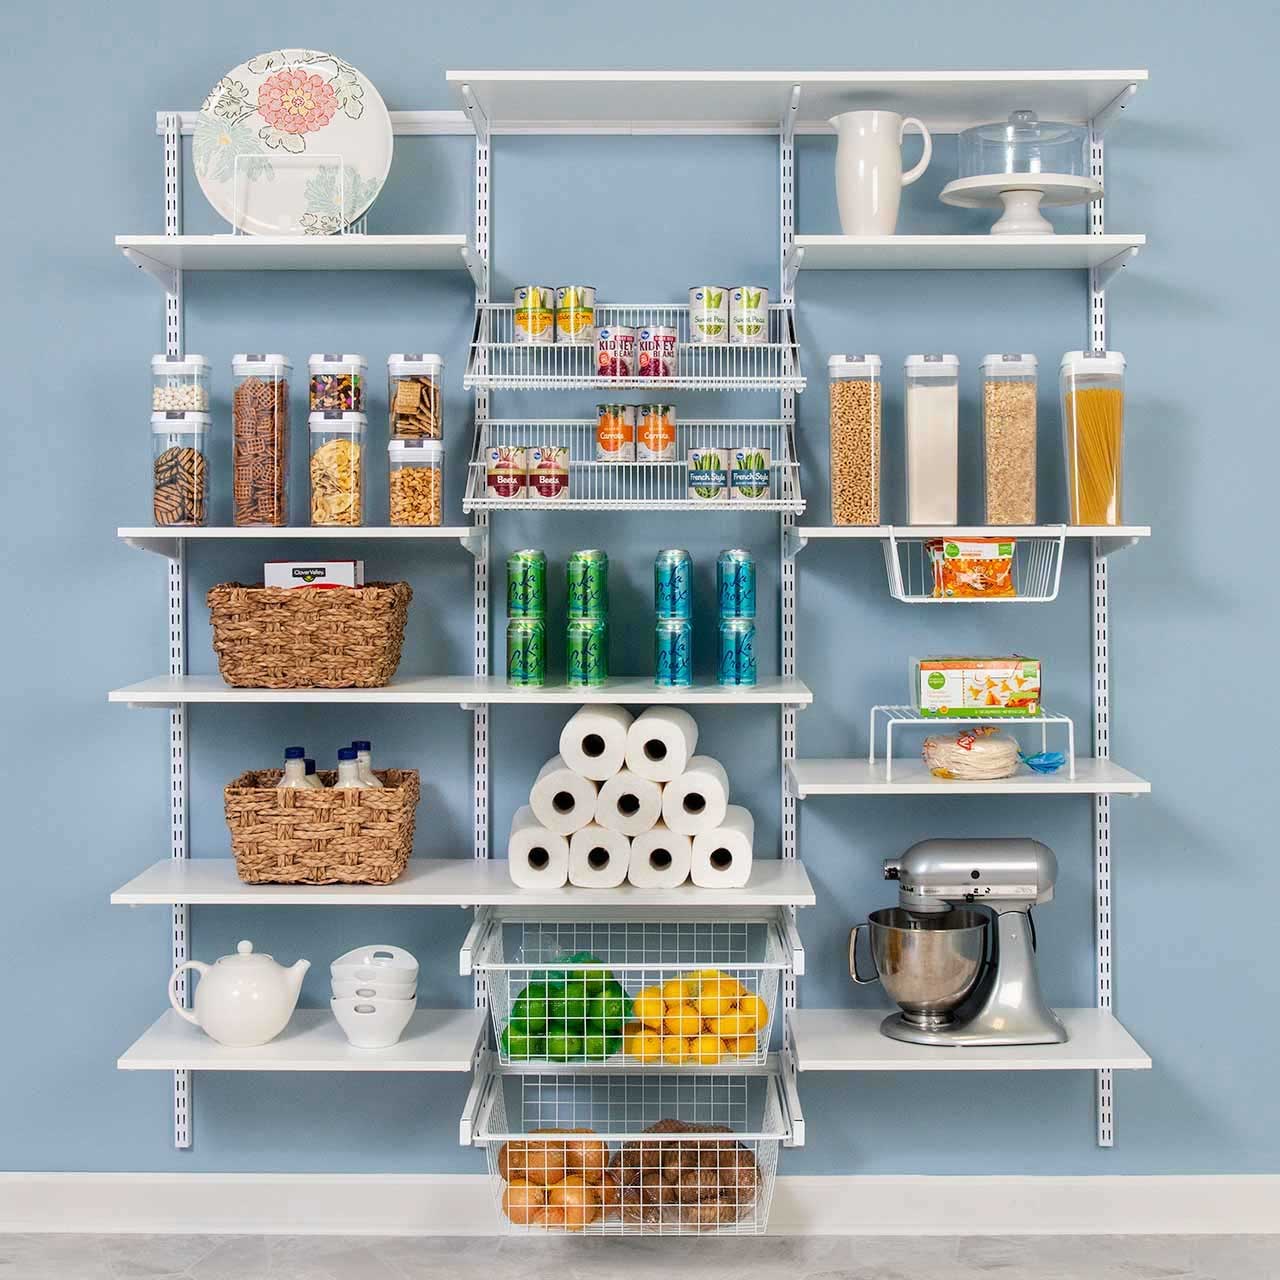 QuikTRAY Rollout Complete 6 Shelf Pantry Kit